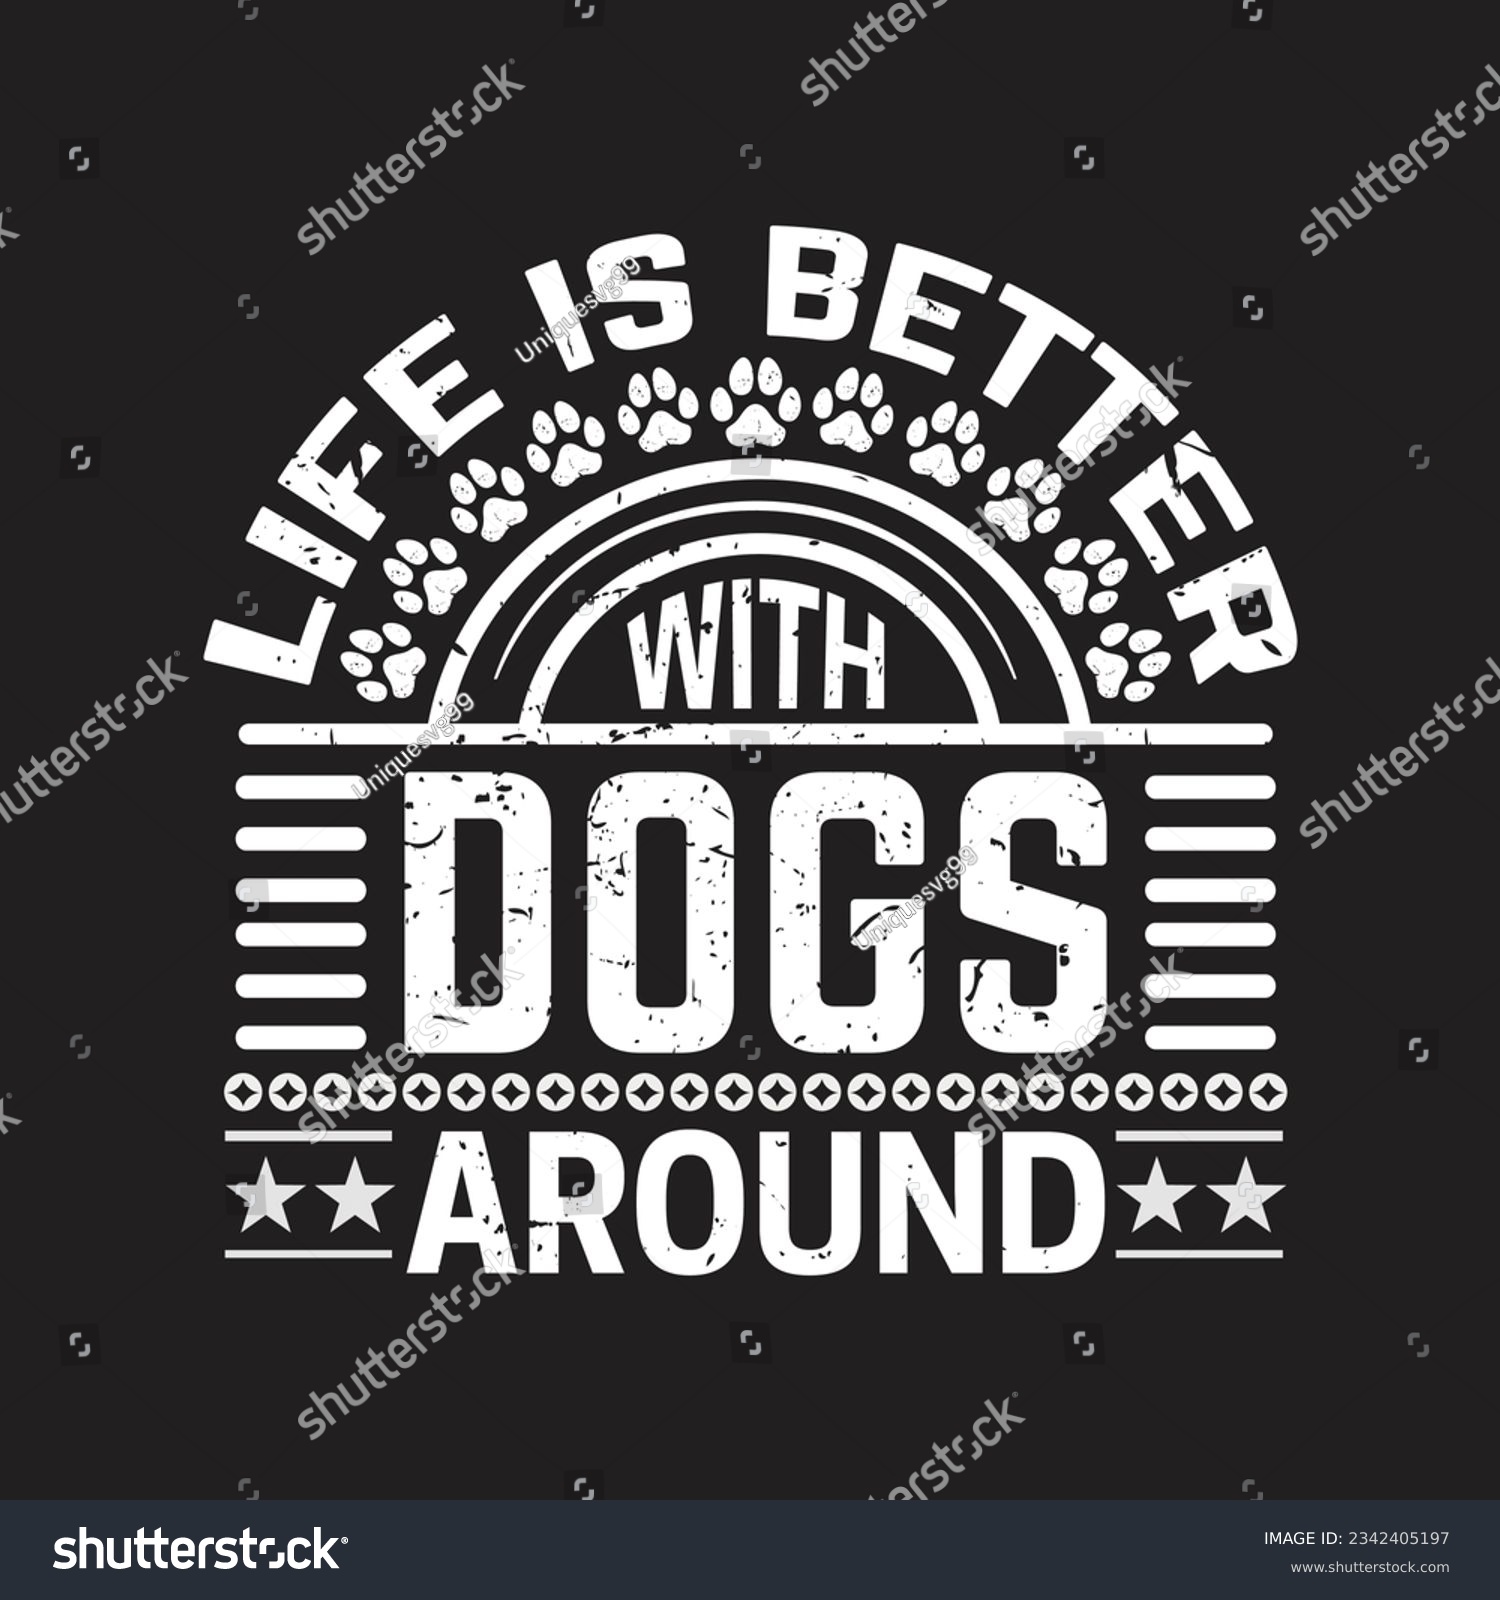 SVG of 
Life is better with dogs around  - Dog t shirt design and bundle. svg